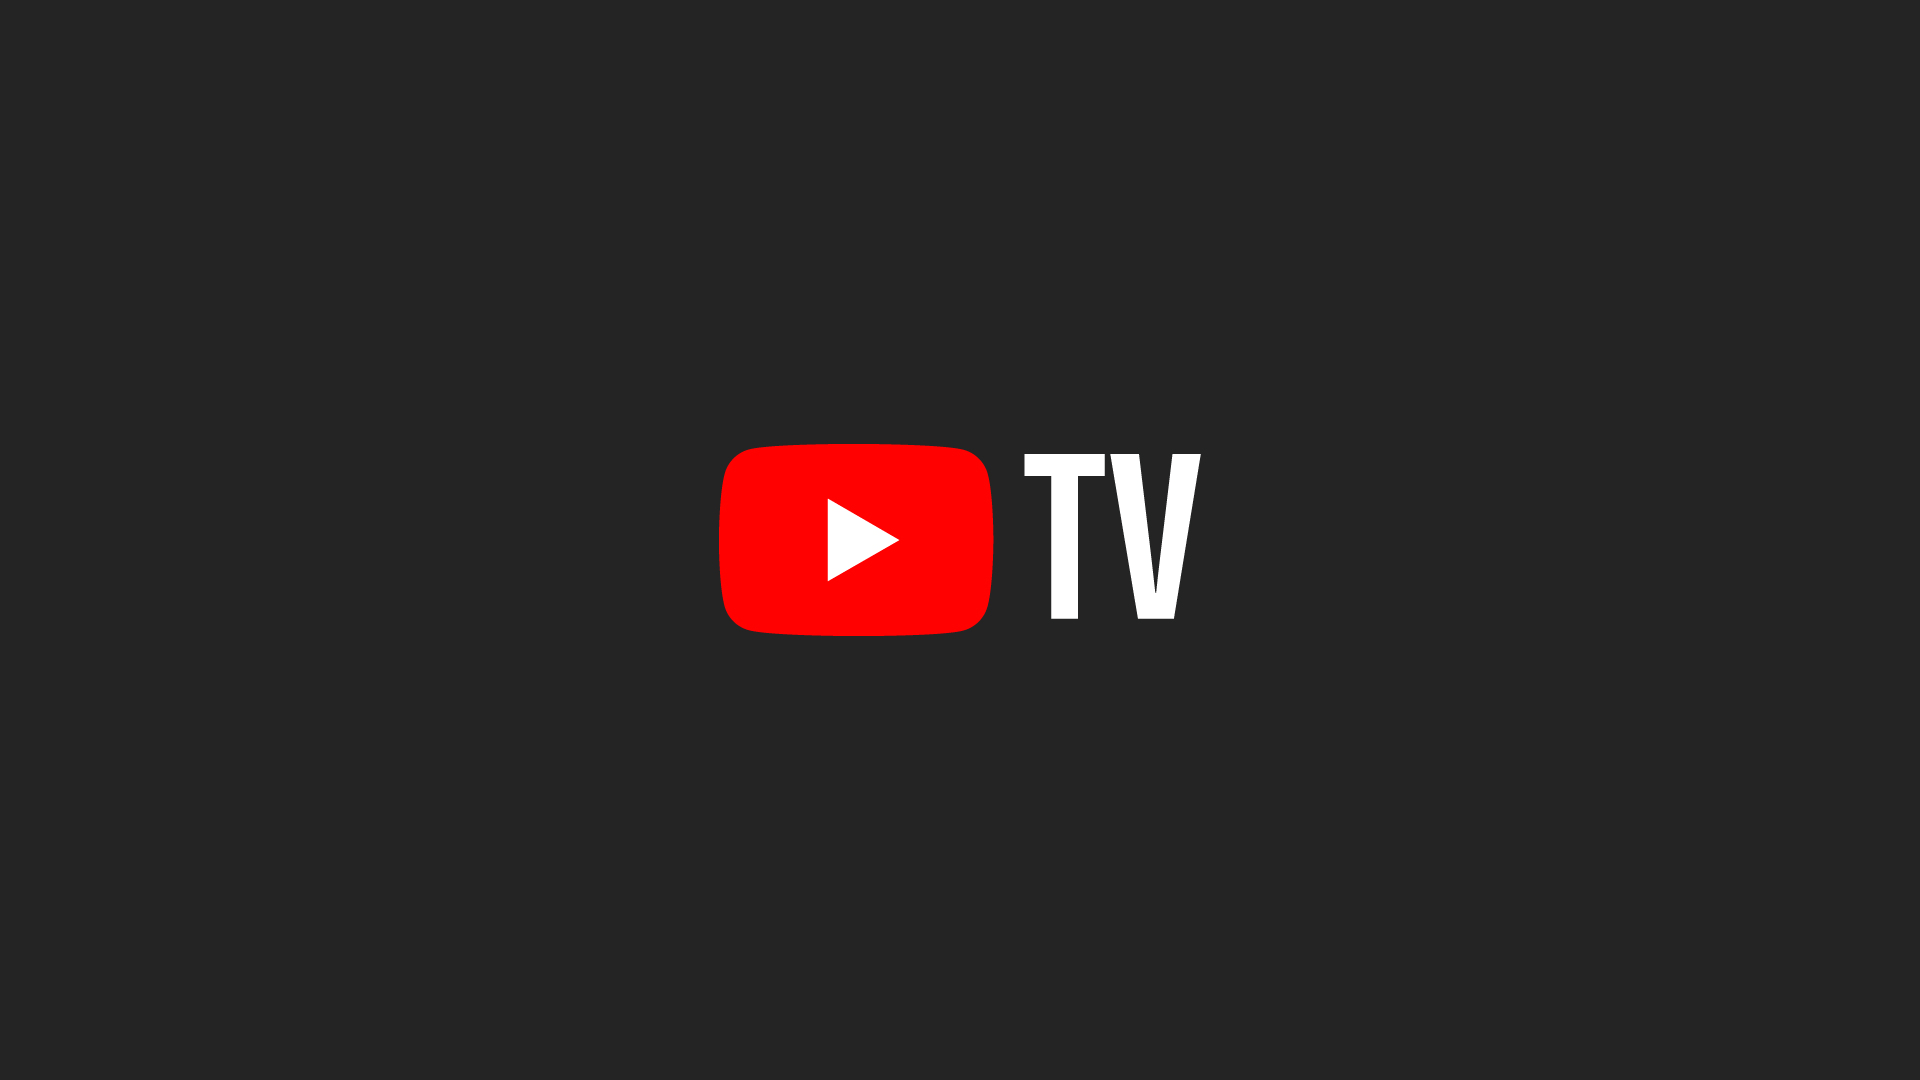 YouTube TV is Ending Support For Apple In-App Purchases for Existing Subscribers